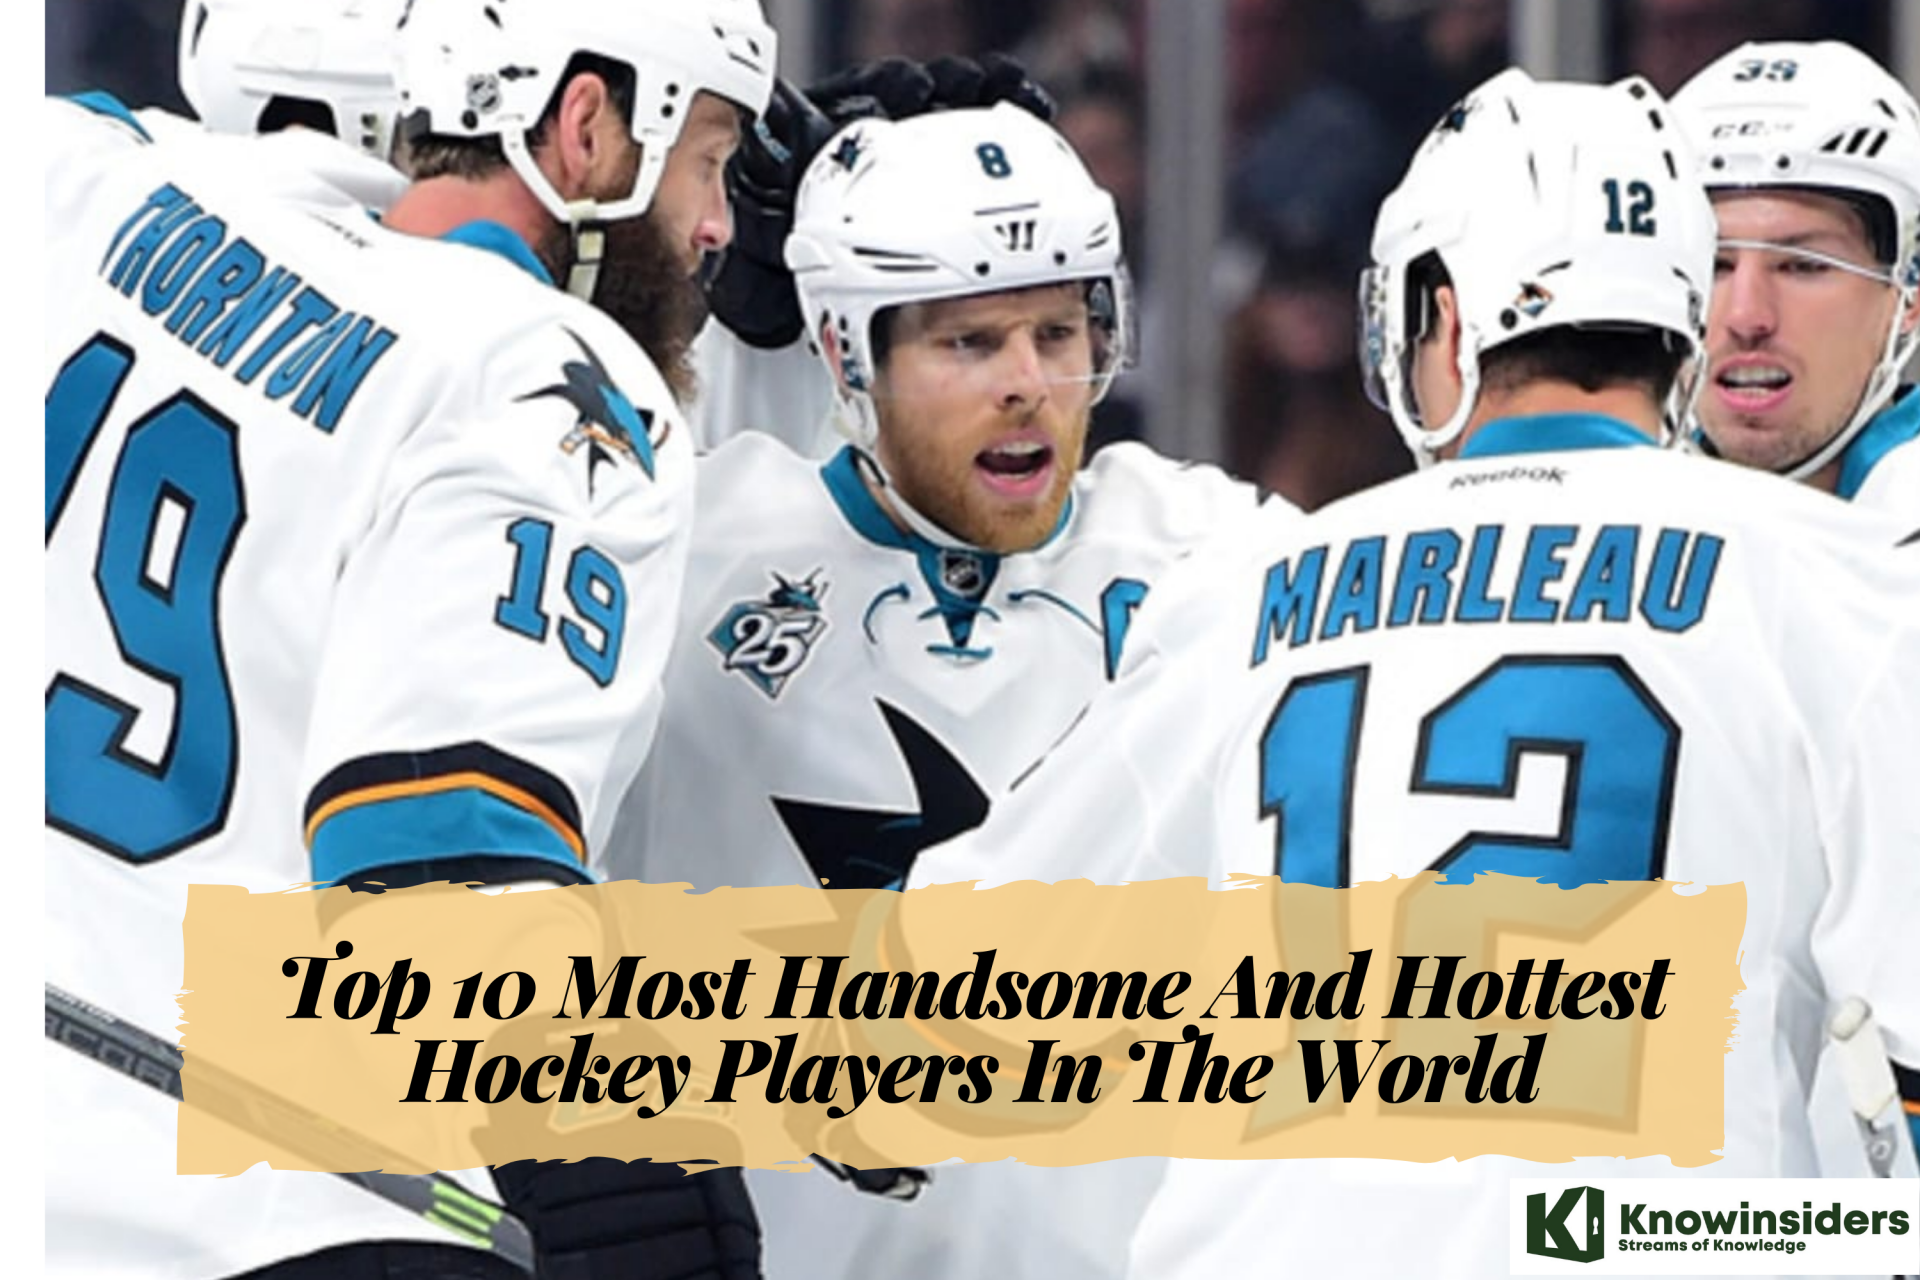 Top 10 Most Handsome And Hottest Hockey Players In The World - Updated